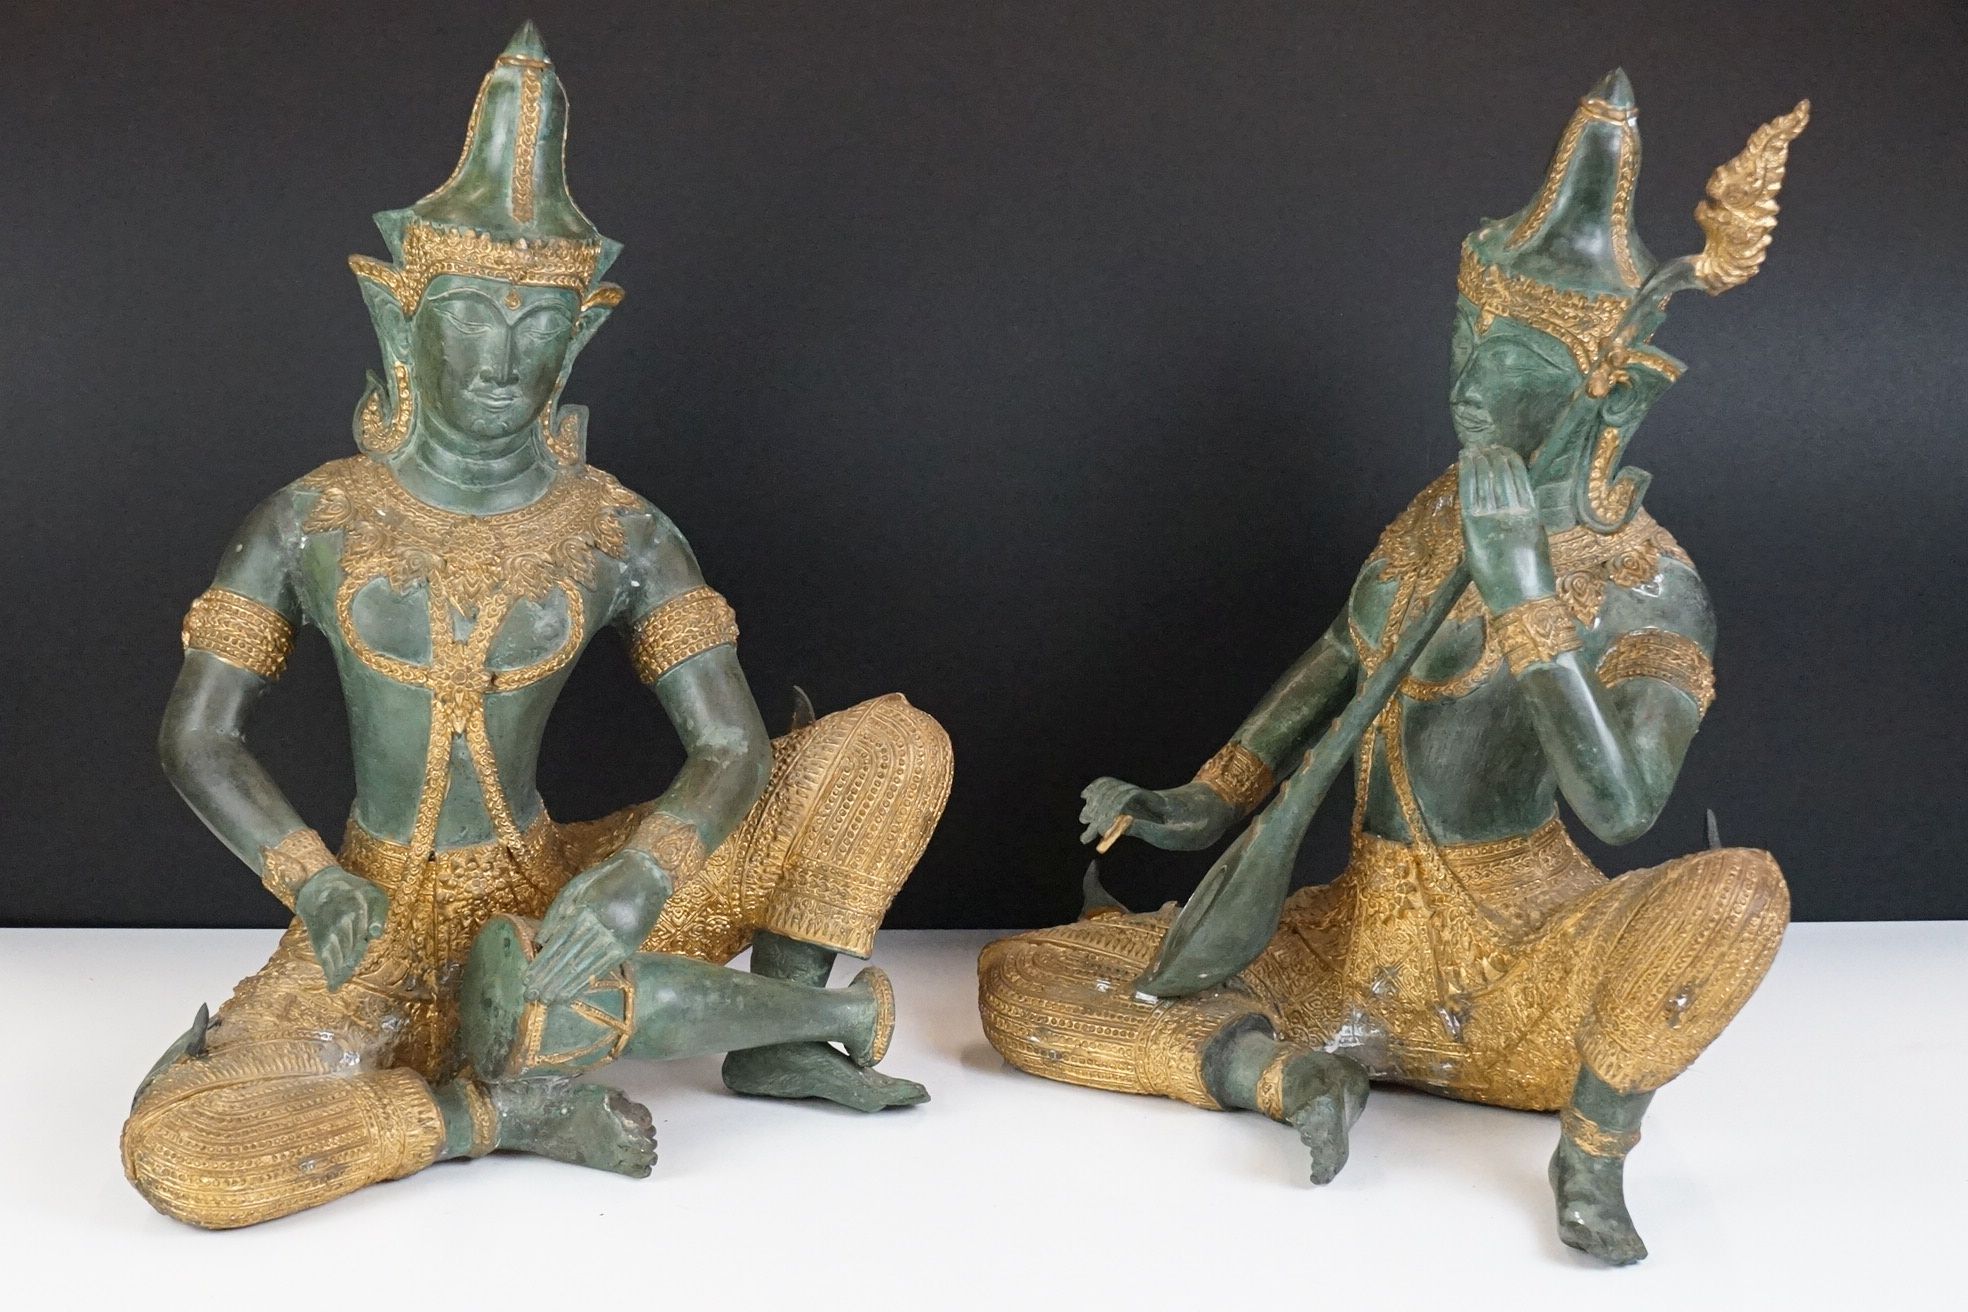 Pair of Thai bronze & gilt sculptures of deities playing musical instruments, one playing a Sueng,